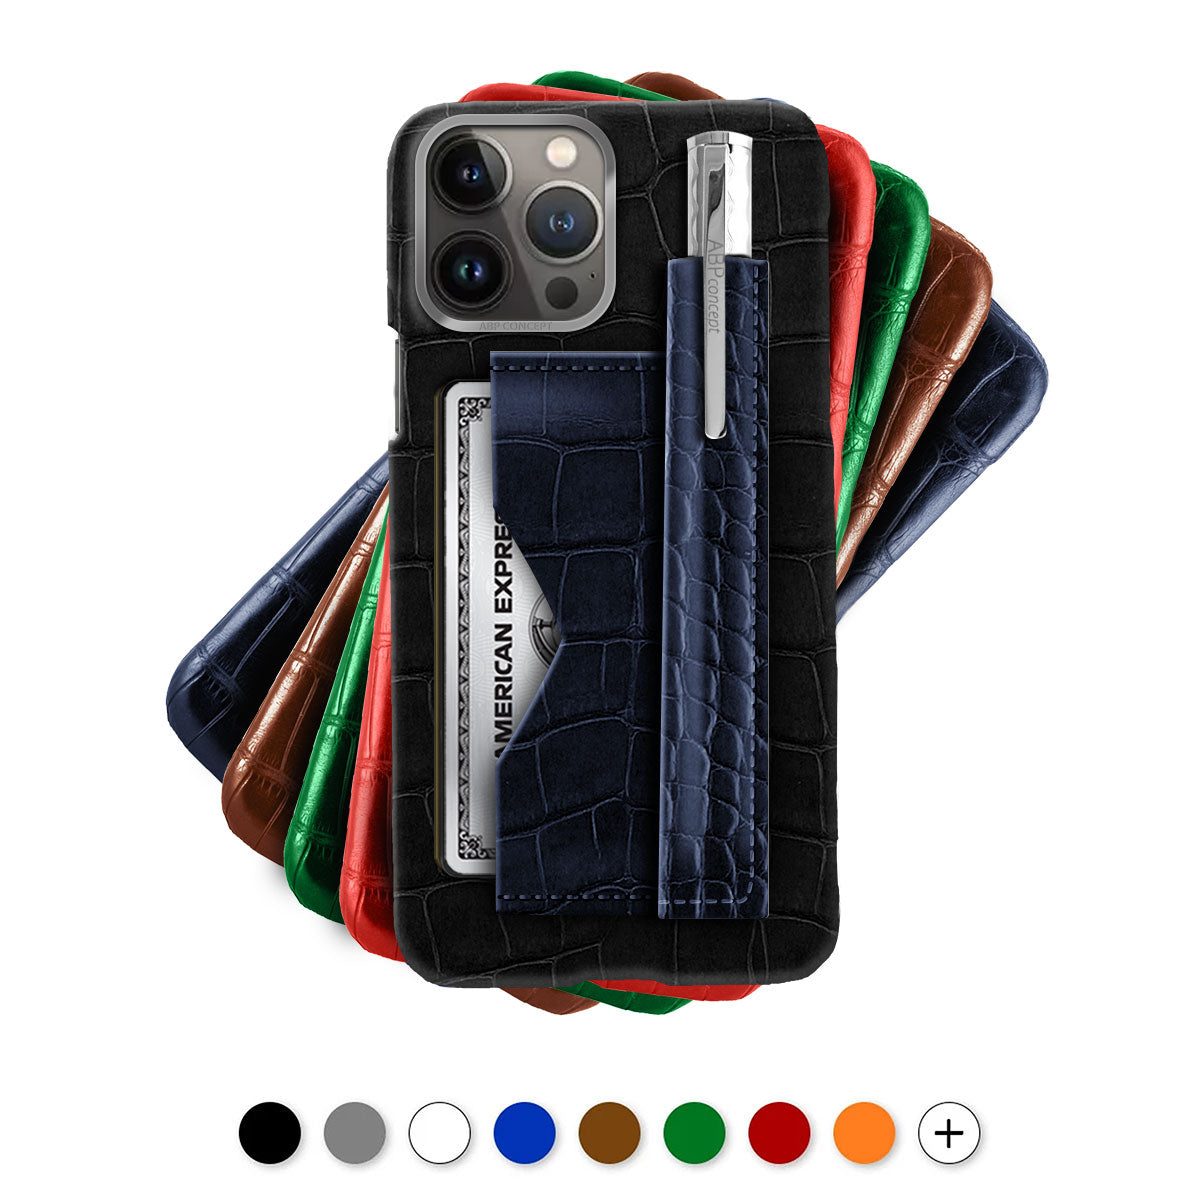 Leather iPhone "Business case" / cover with credit card pocket and ball pen - iPhone 15, 14 & 13 Pro Max - Genuine alligator